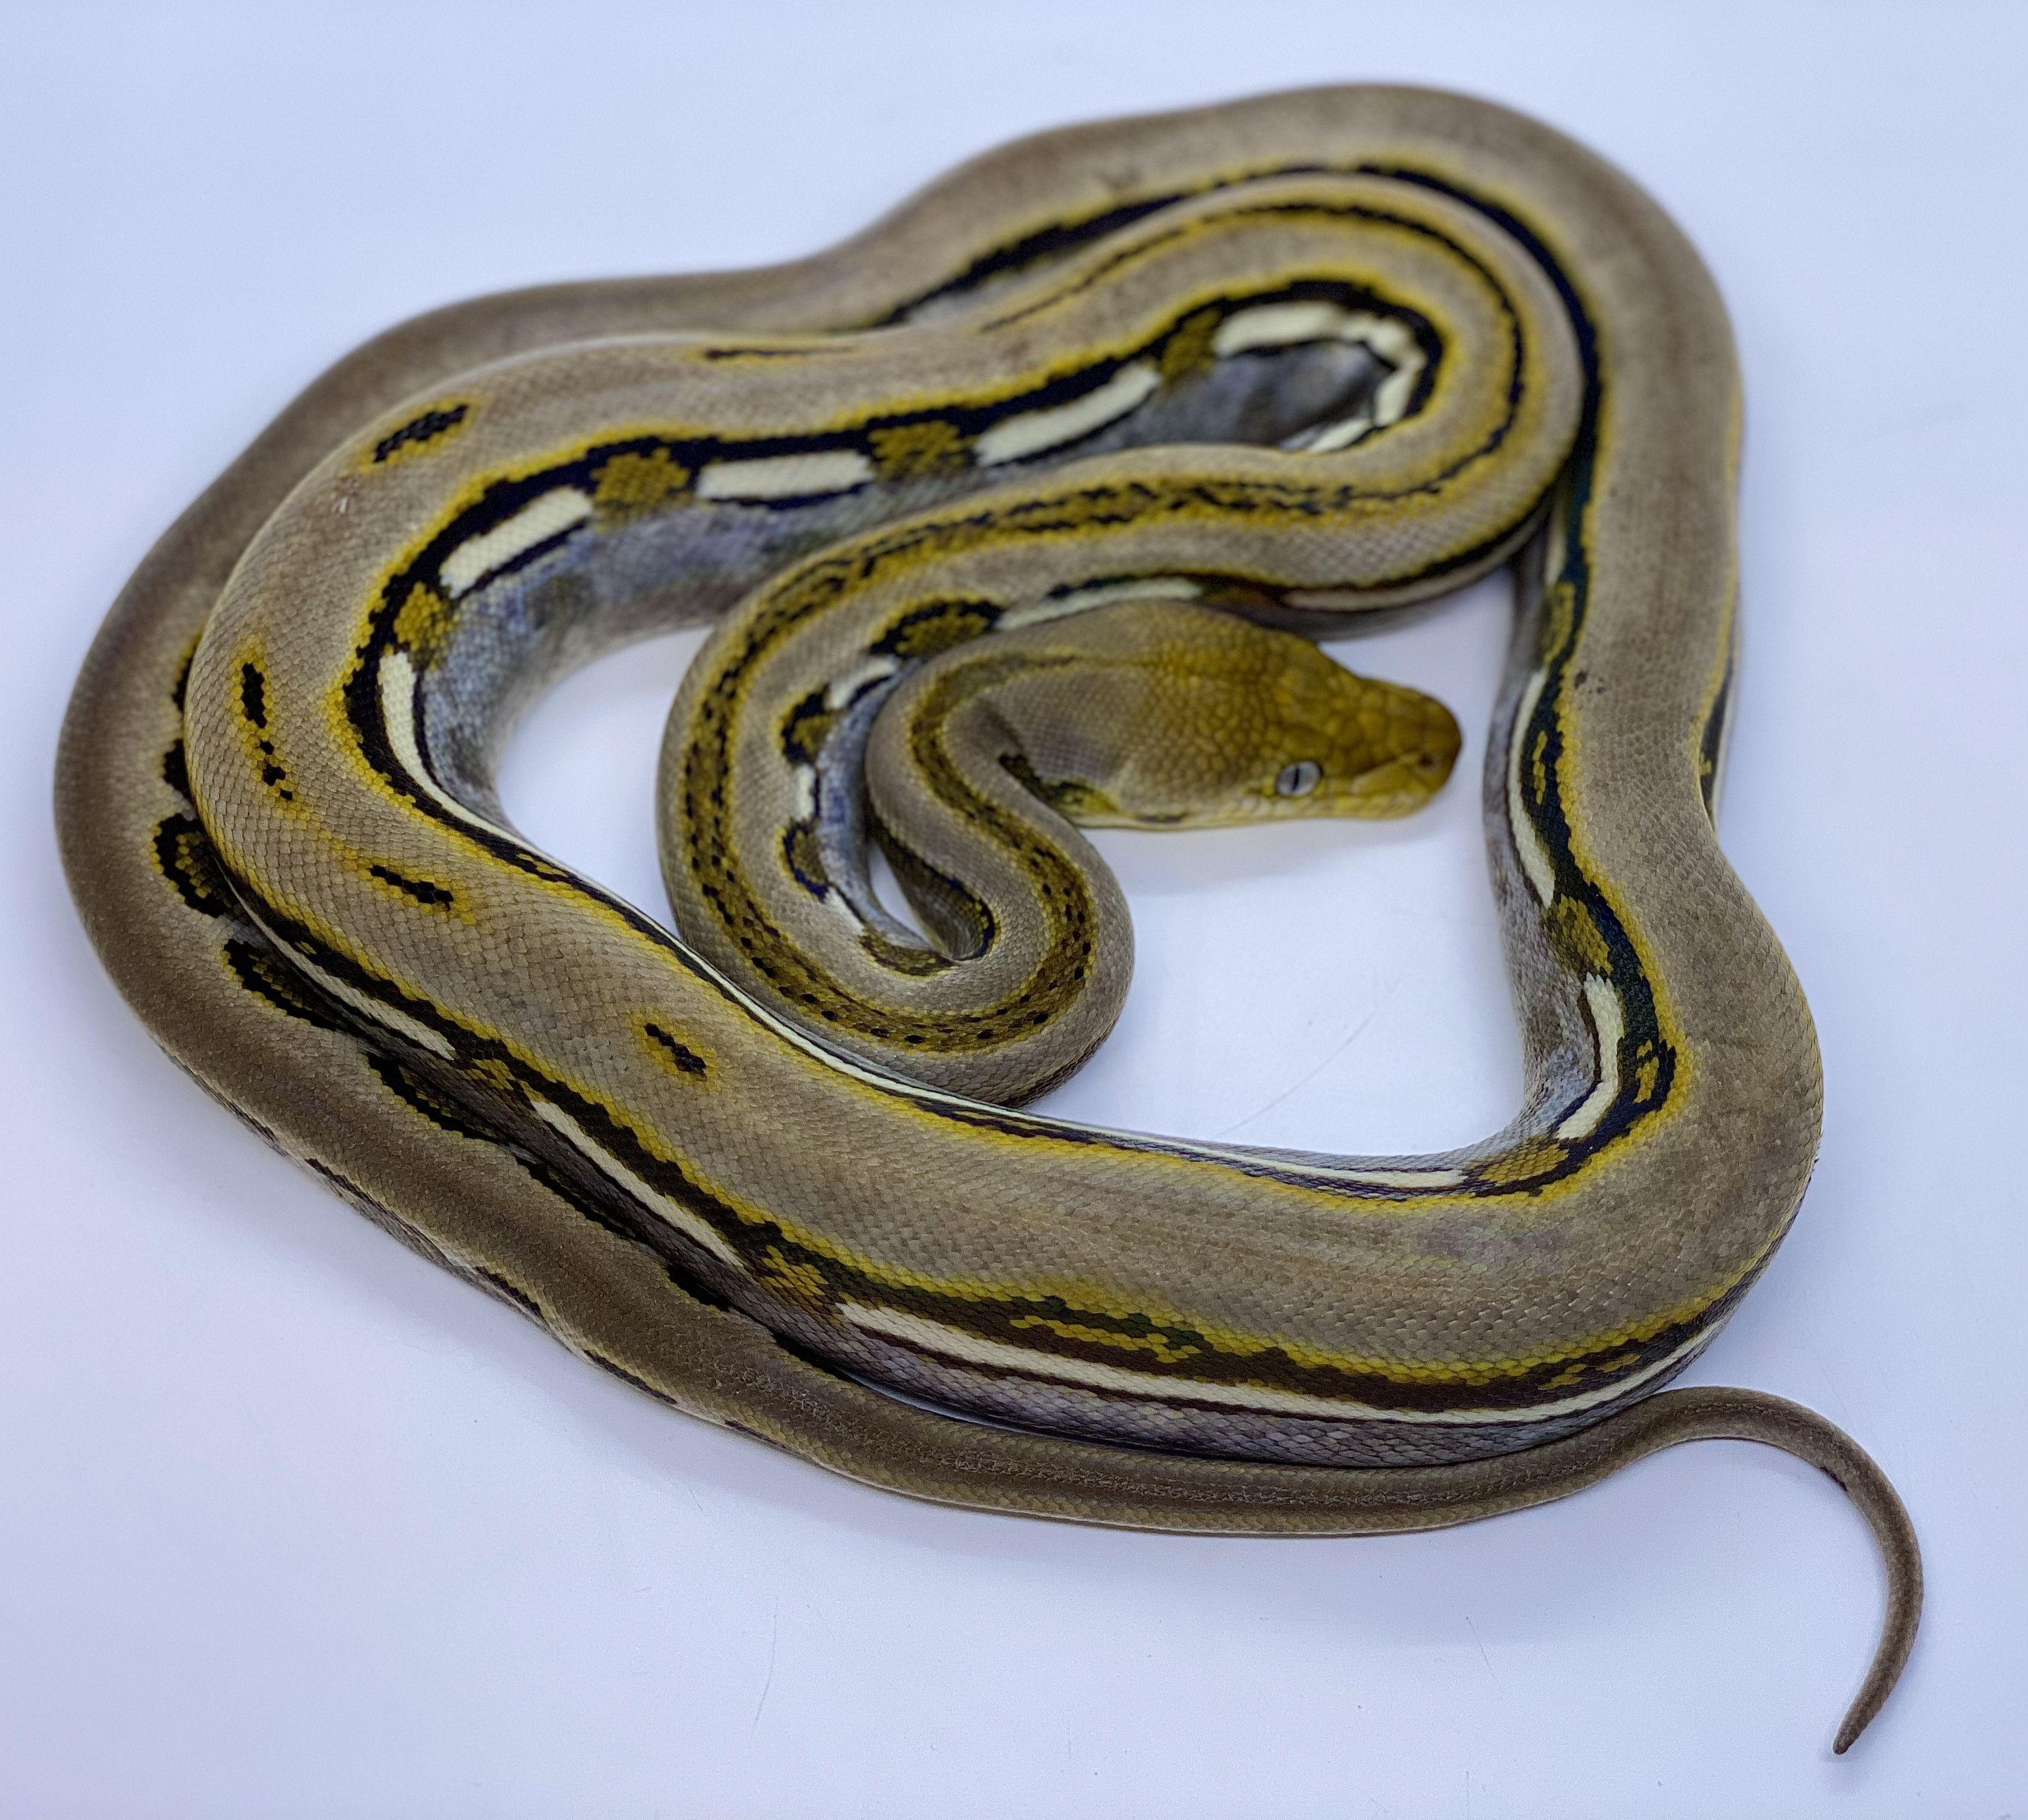 Genetic Stripe Reticulated Python by Prehistoric Pets